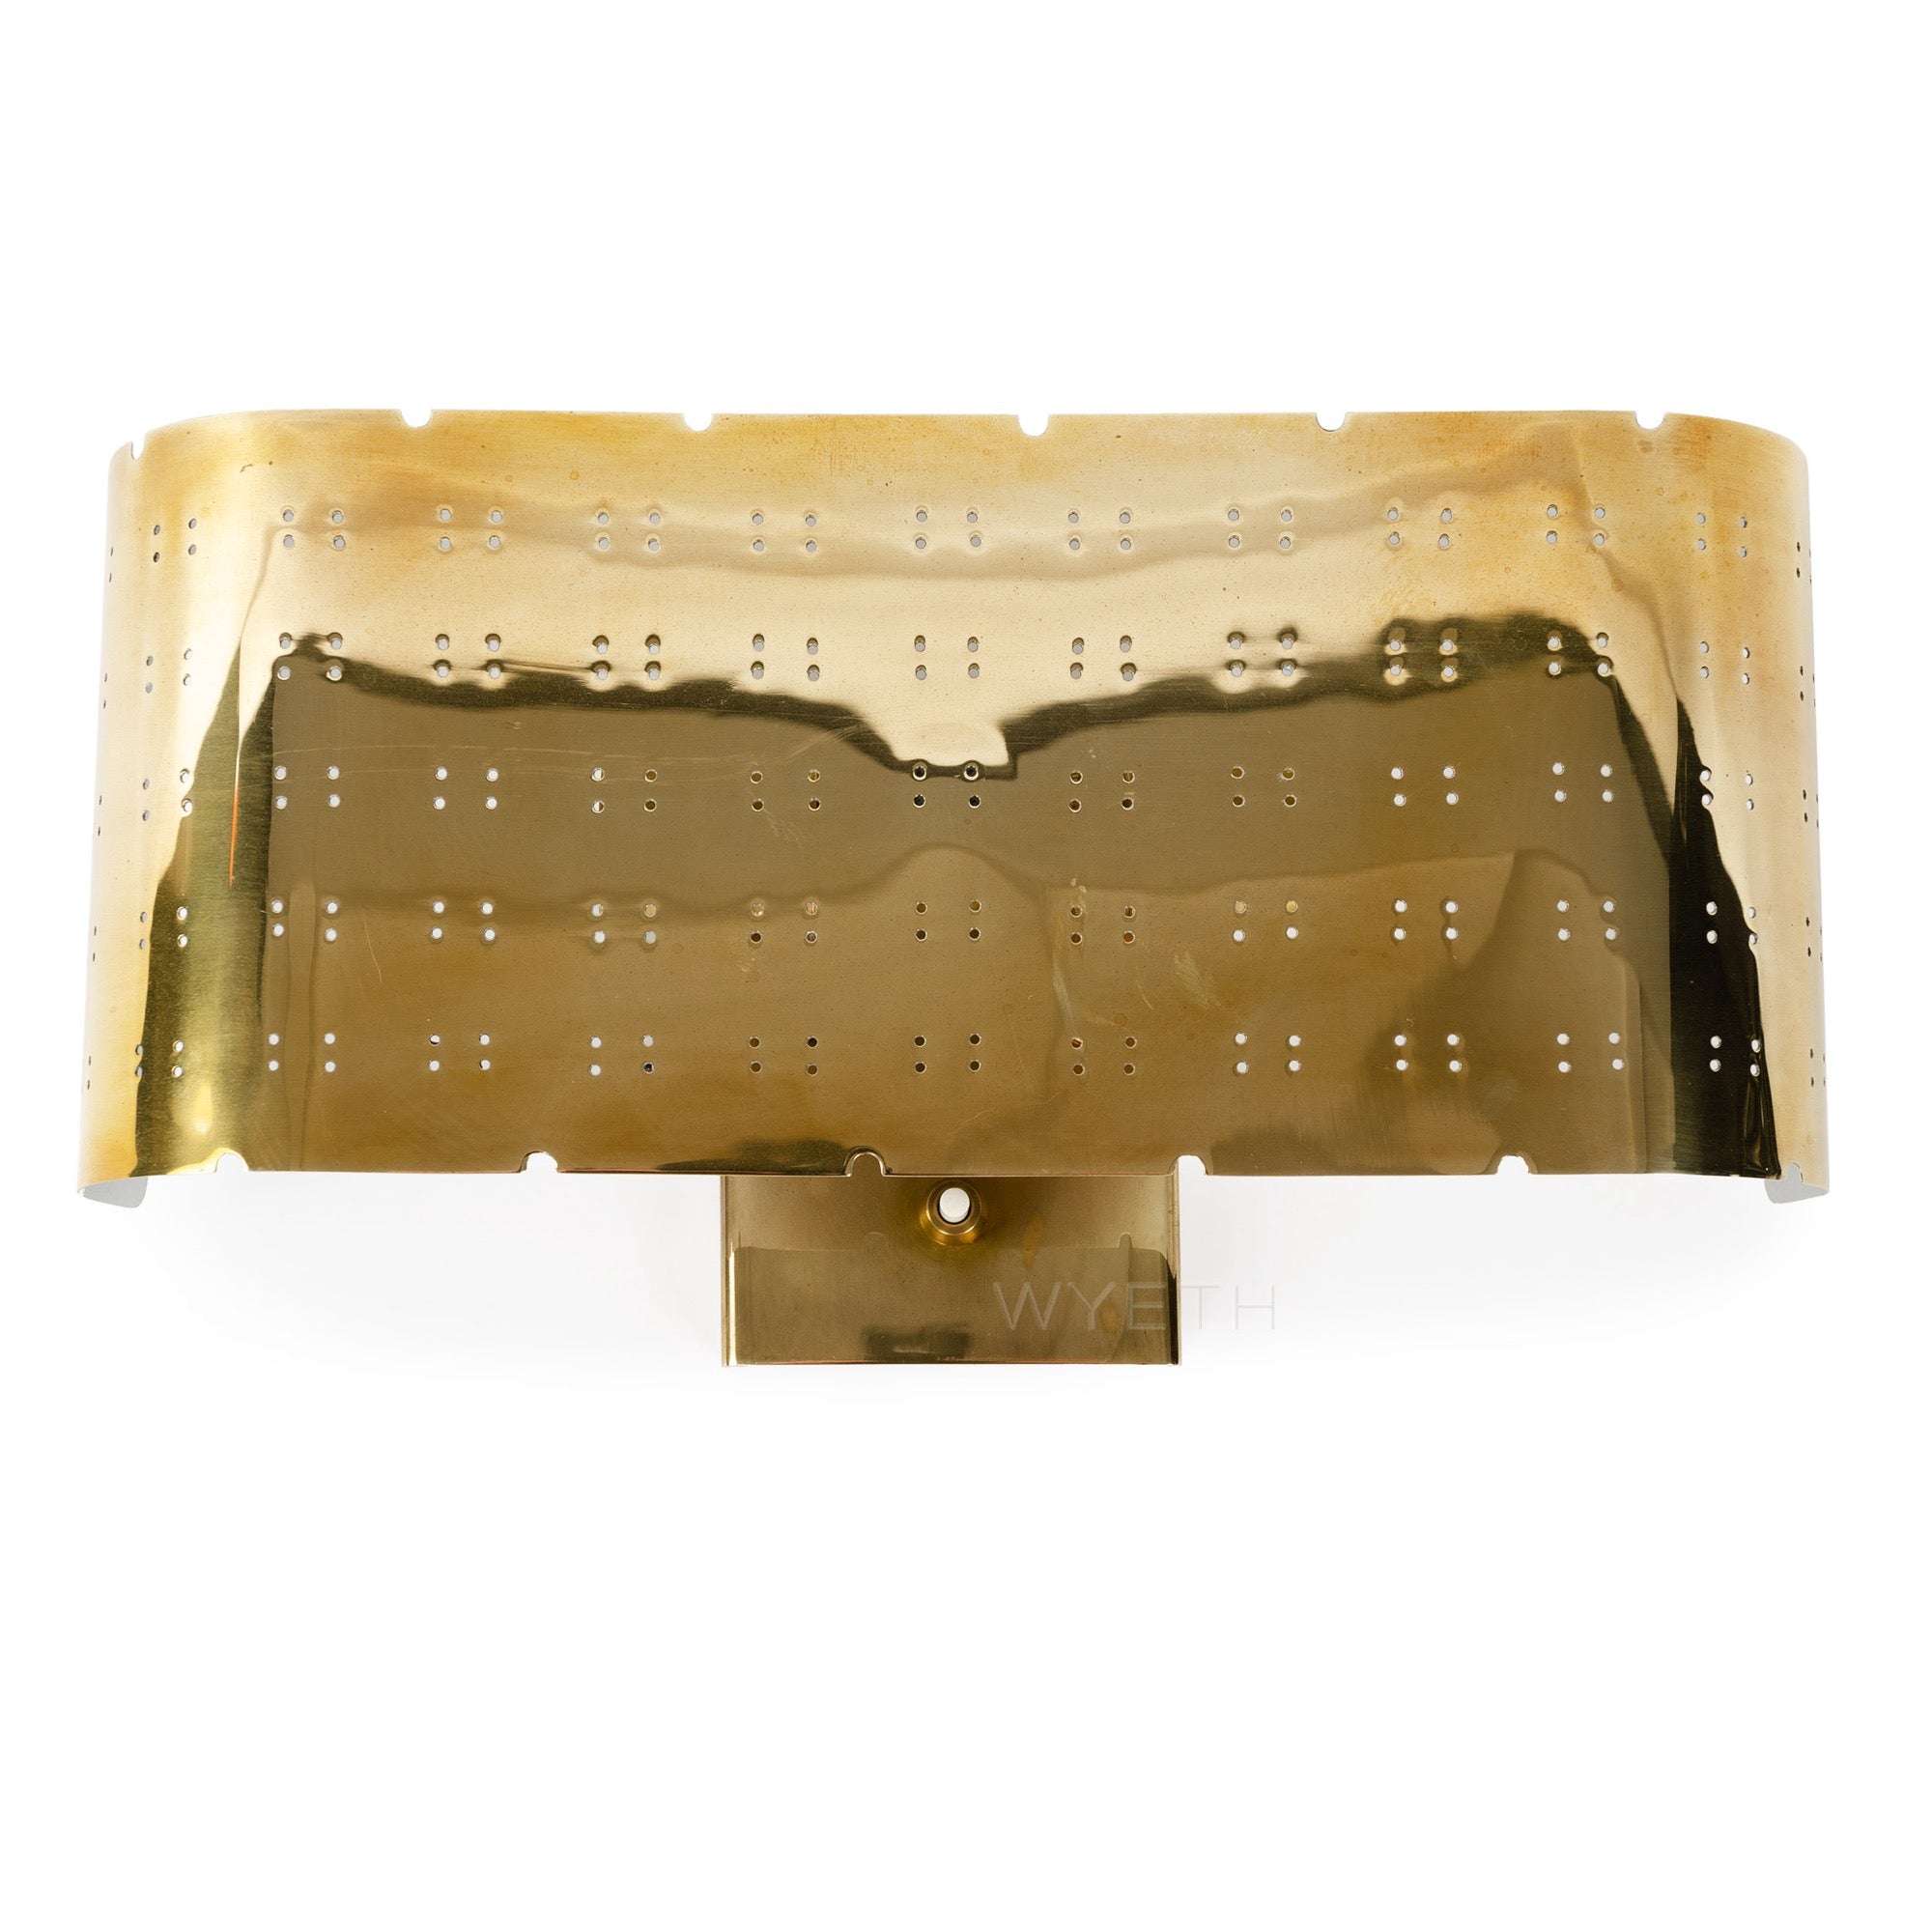 Perforated Brass Sconce from Finland